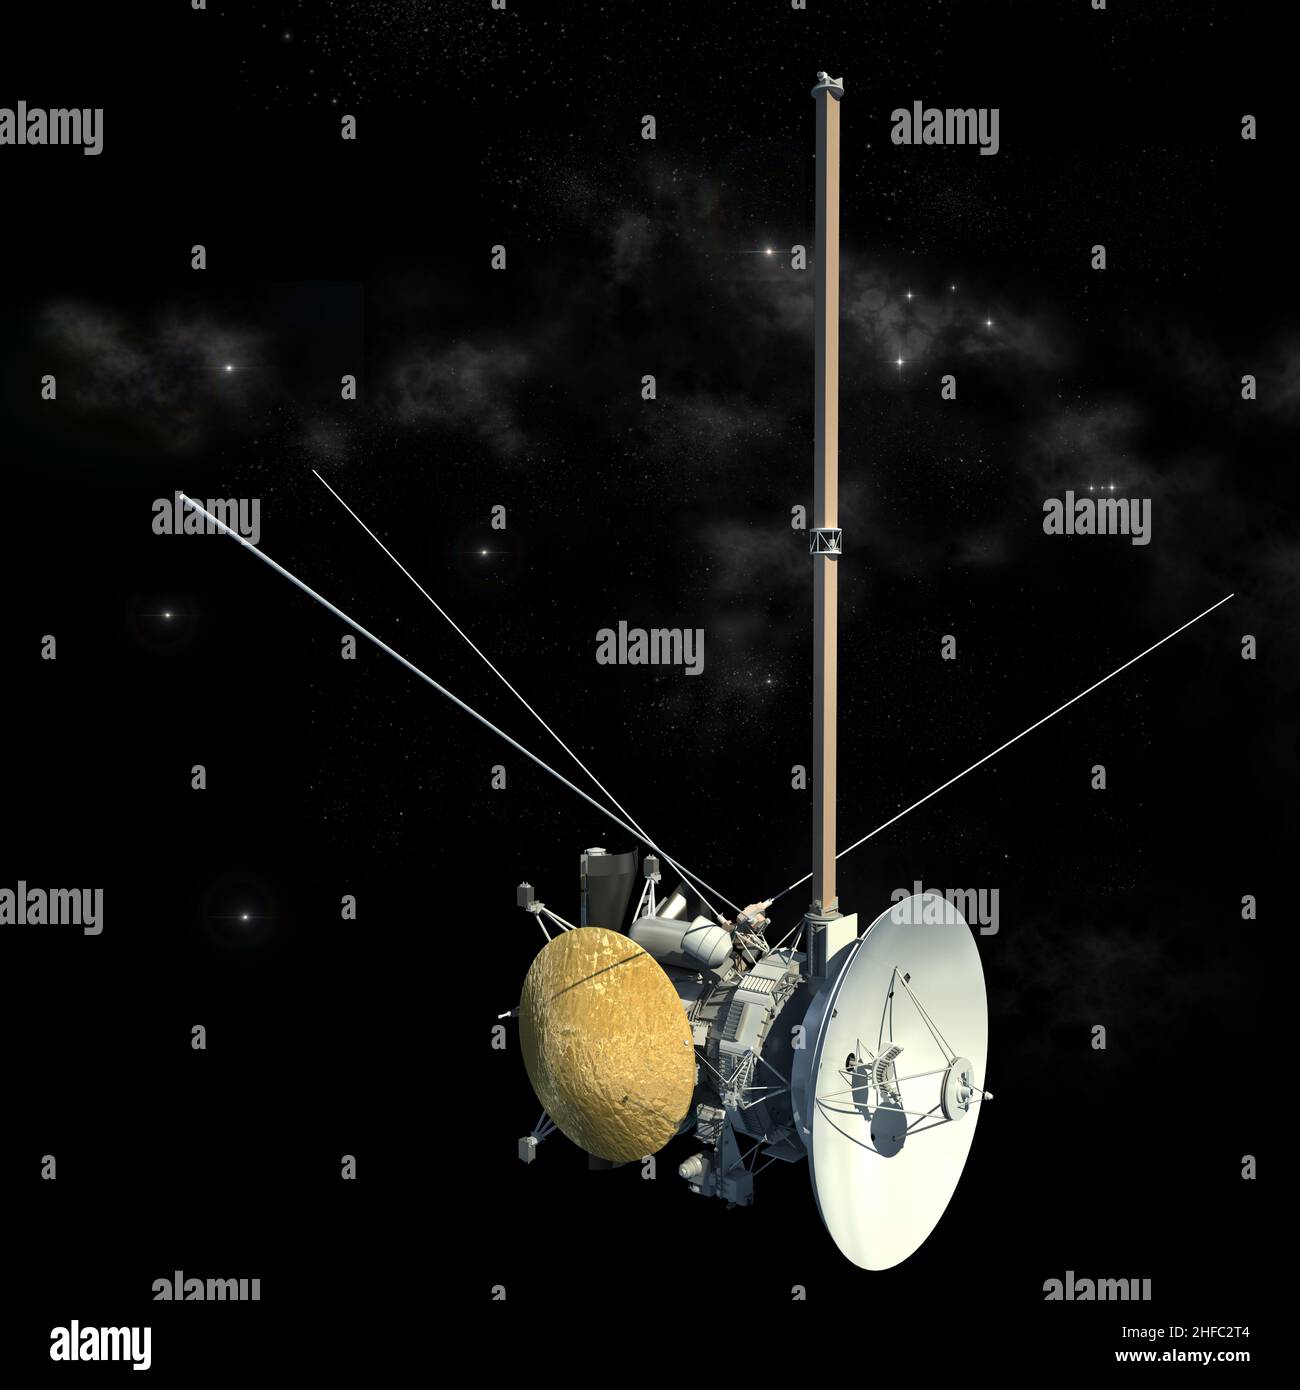 Unmanned spacecraft similar to the Cassini Huygens orbiter satellite, with the isolation path included in the 3D illustration. Stock Photo